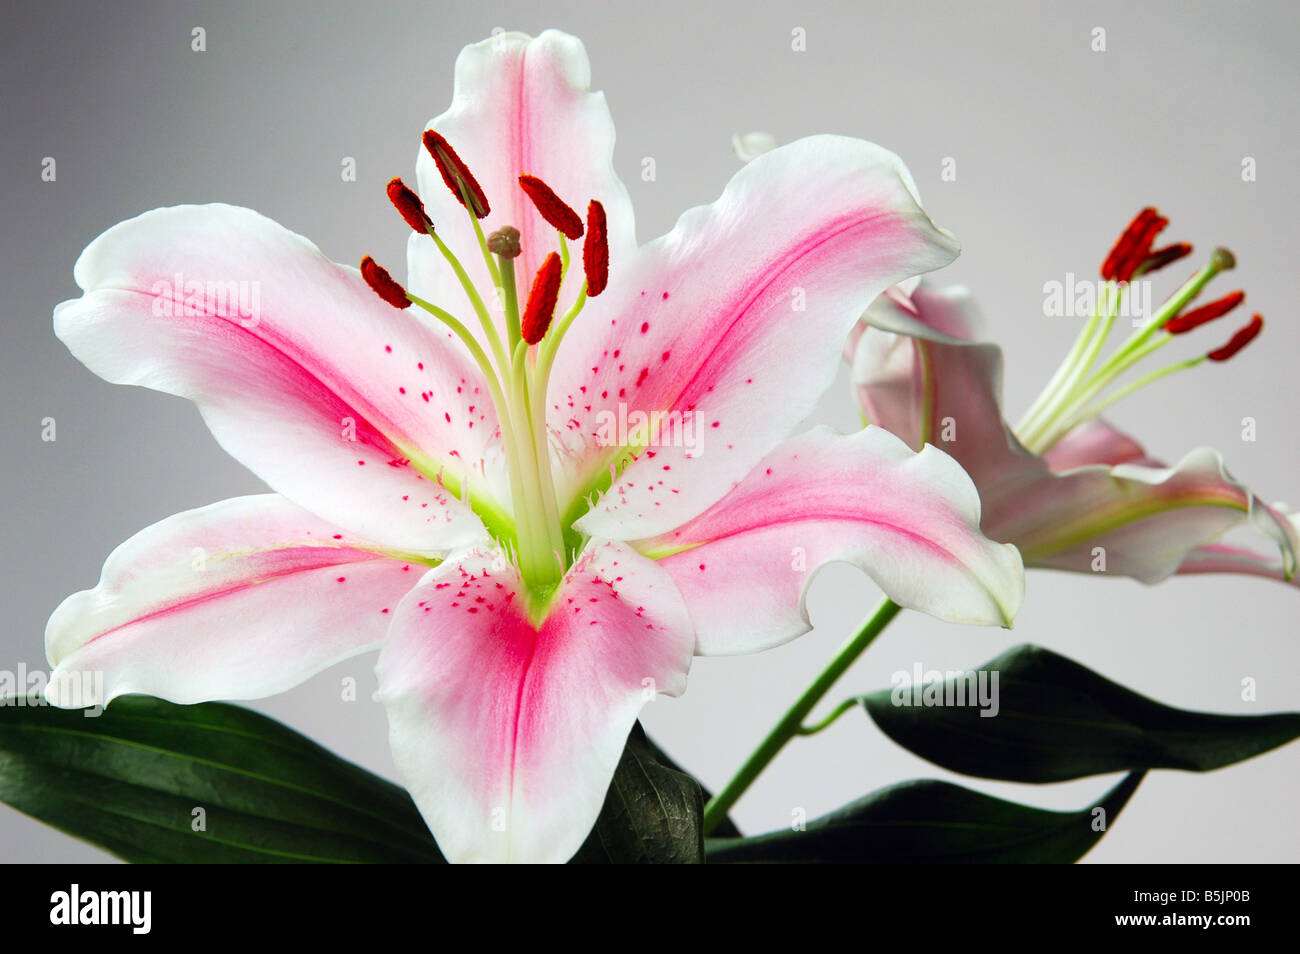 The Stargazer lily A.K.A. Lilium Star Gazer, is a large fragrant flower from the Liliaceae family. Stock Photo